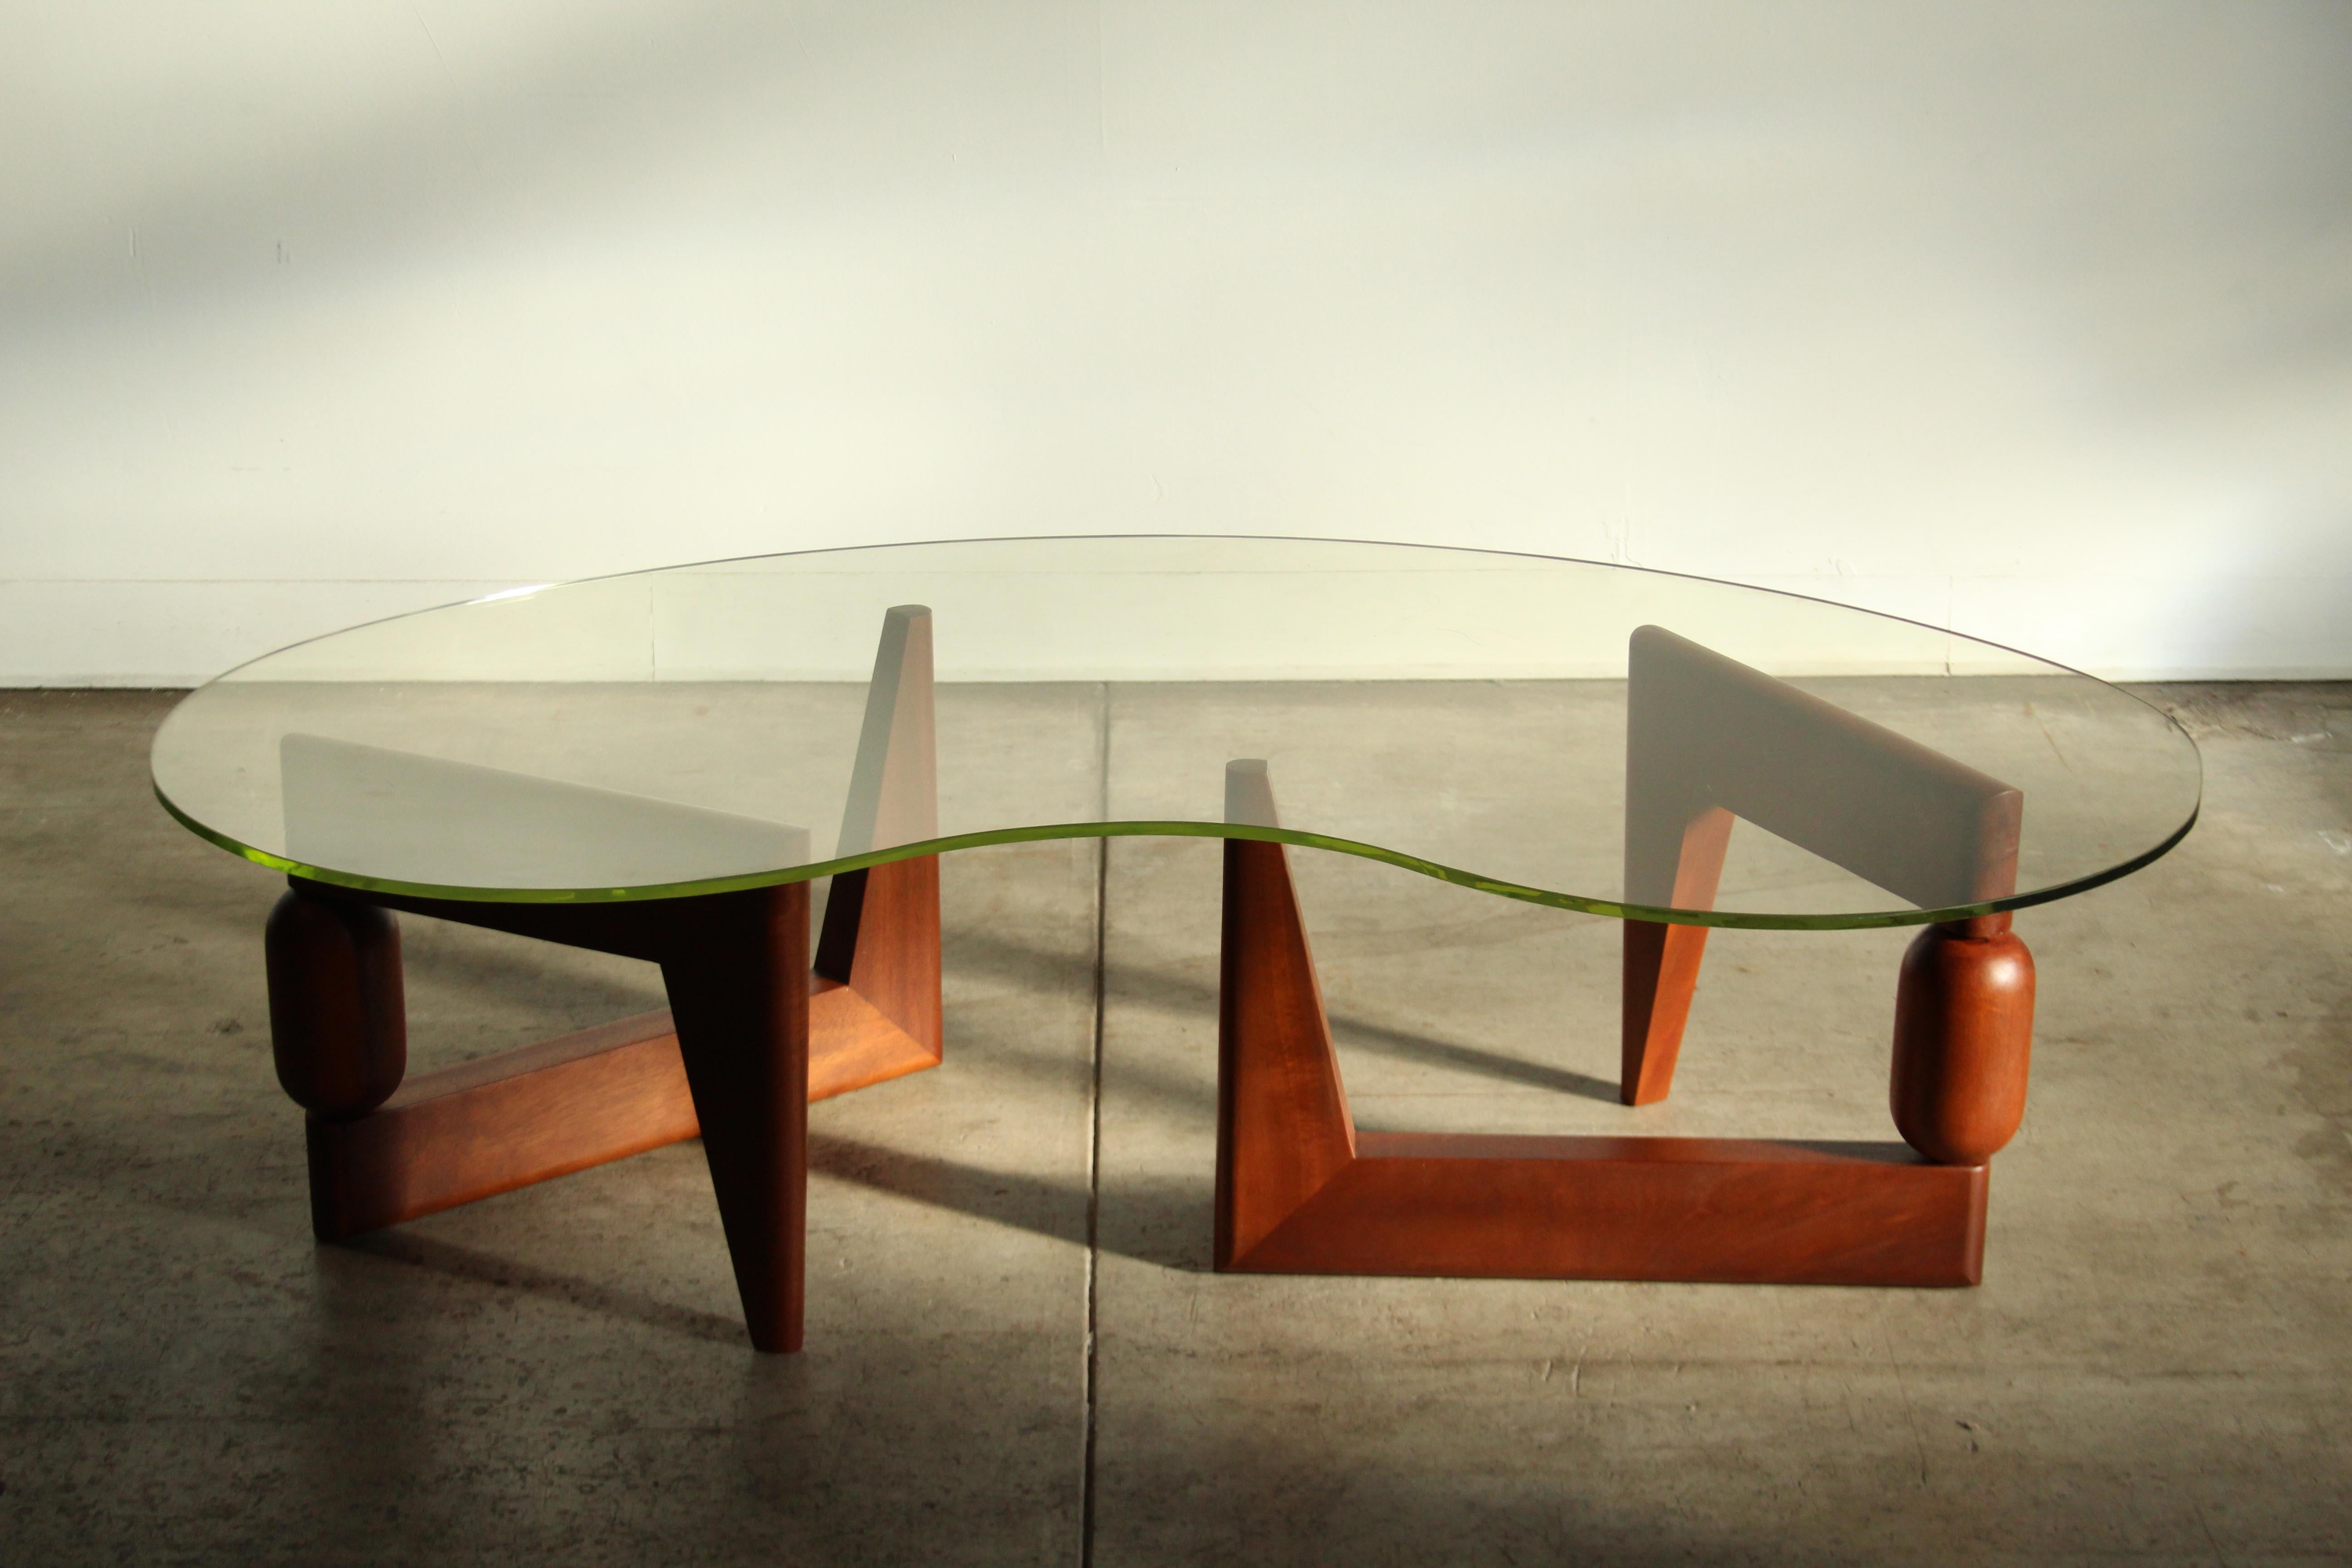 American Sculptural Freeform Coffee Table in the Manner of Isamu Noguchi, 1970s For Sale